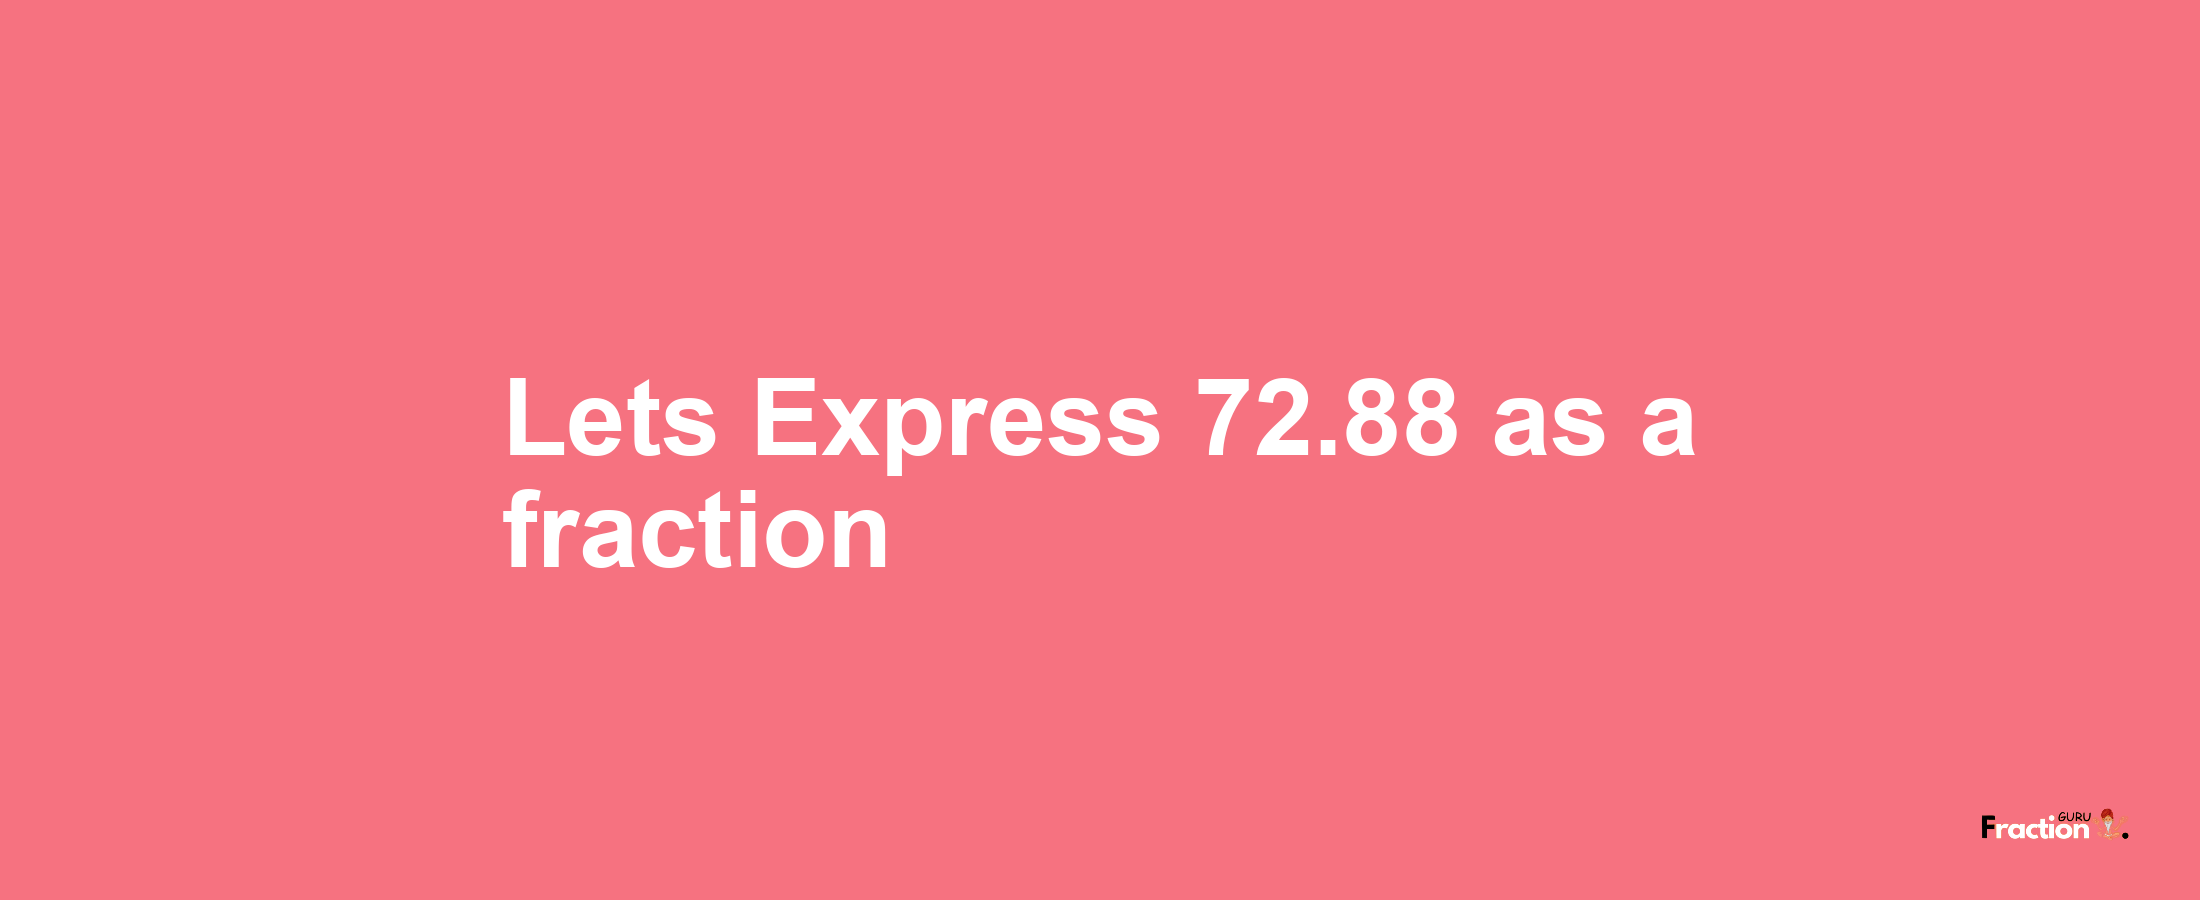 Lets Express 72.88 as afraction